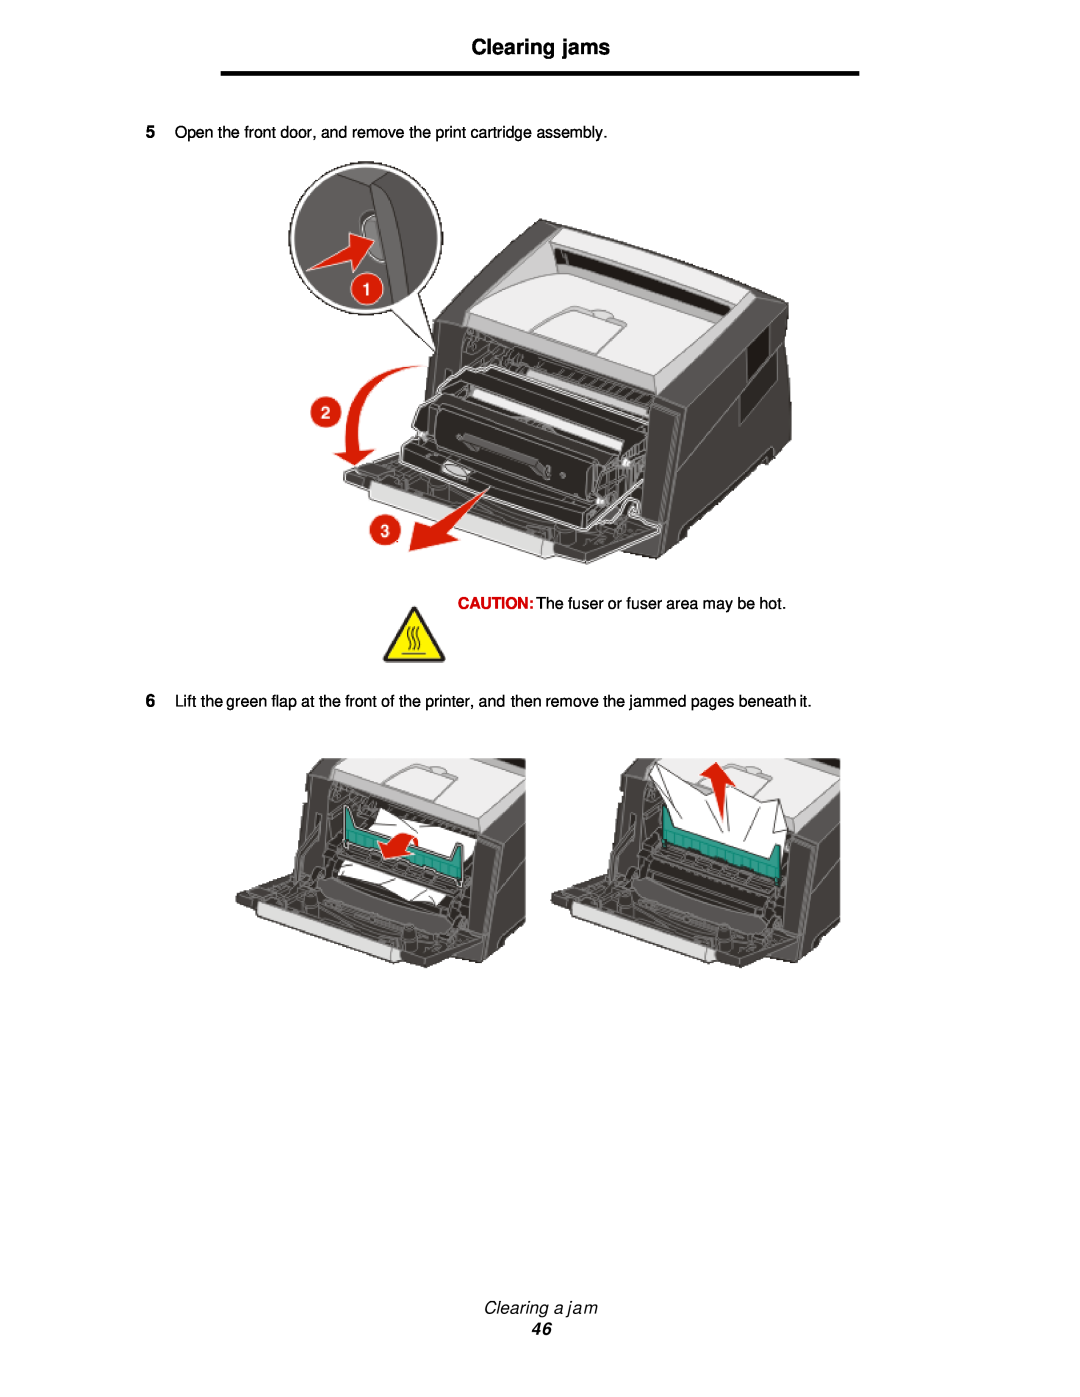 Lexmark 350d manual Clearing jams, Clearing a jam, Open the front door, and remove the print cartridge assembly 